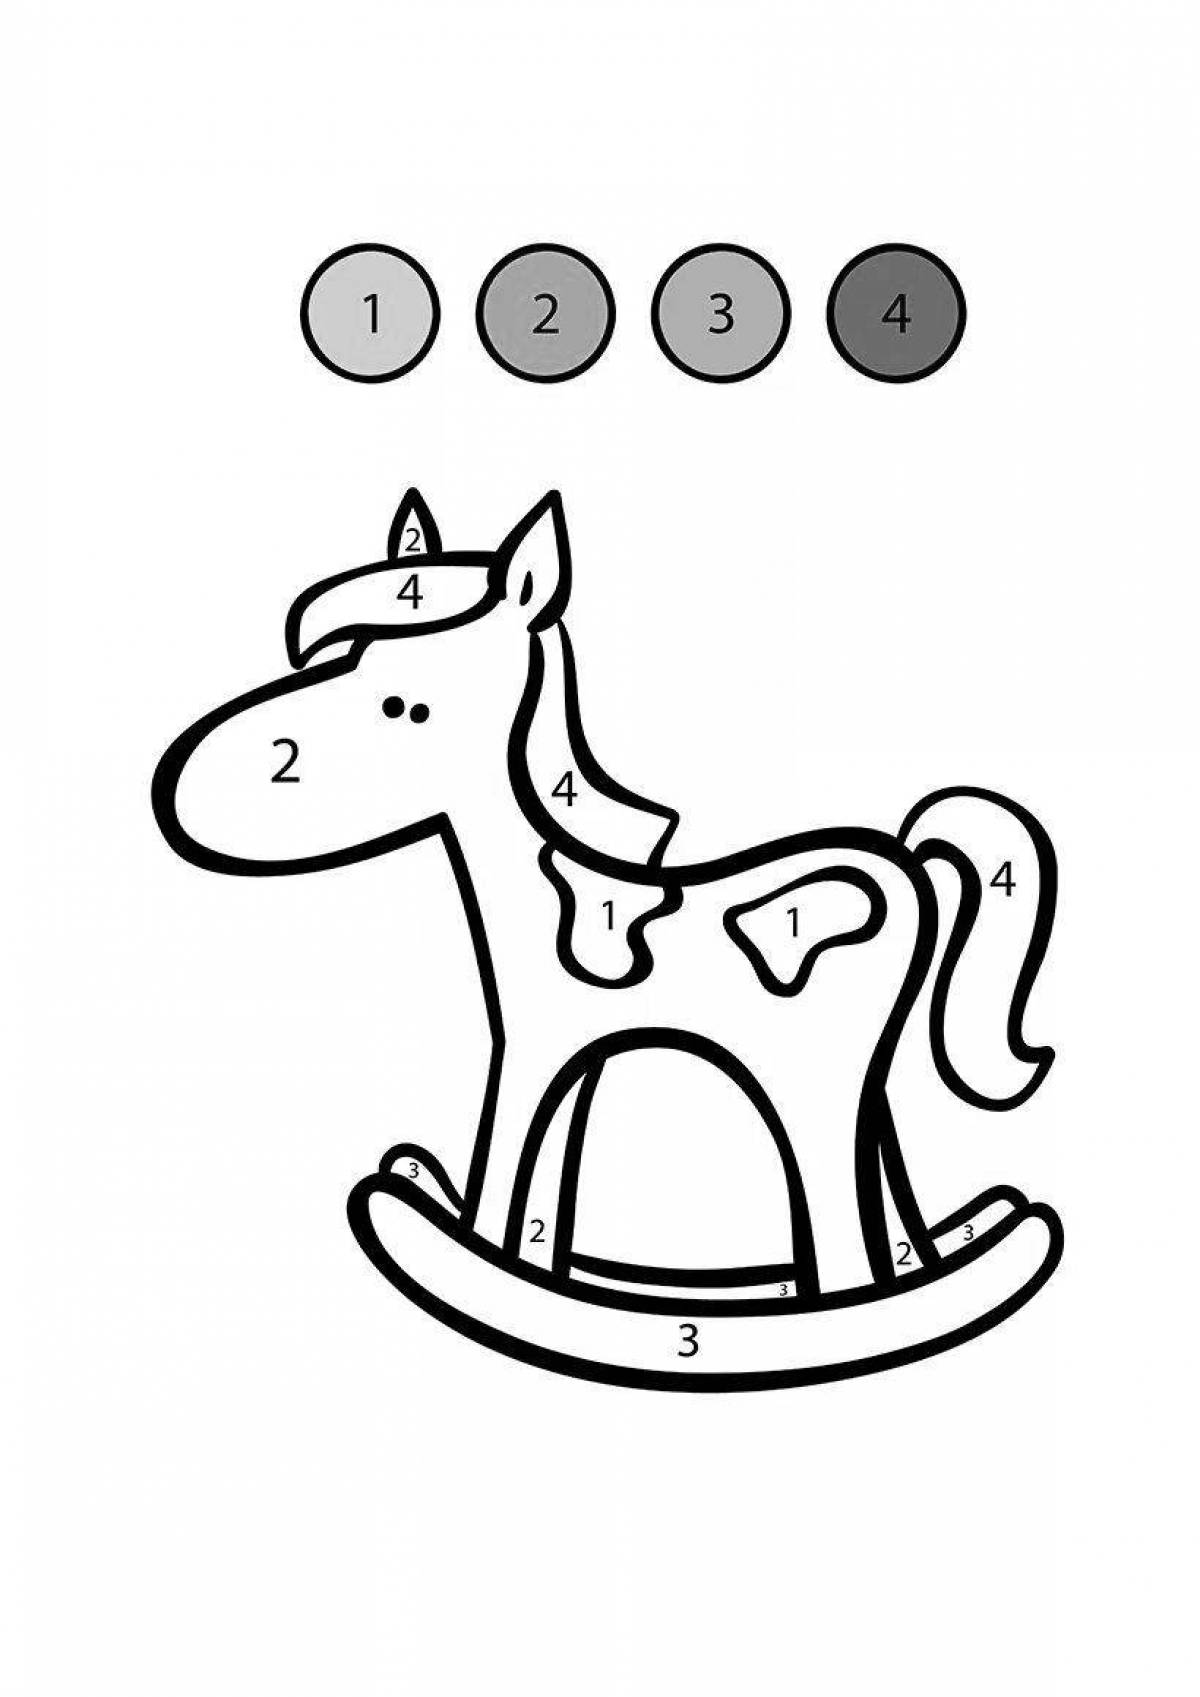 Bright horse coloring by numbers